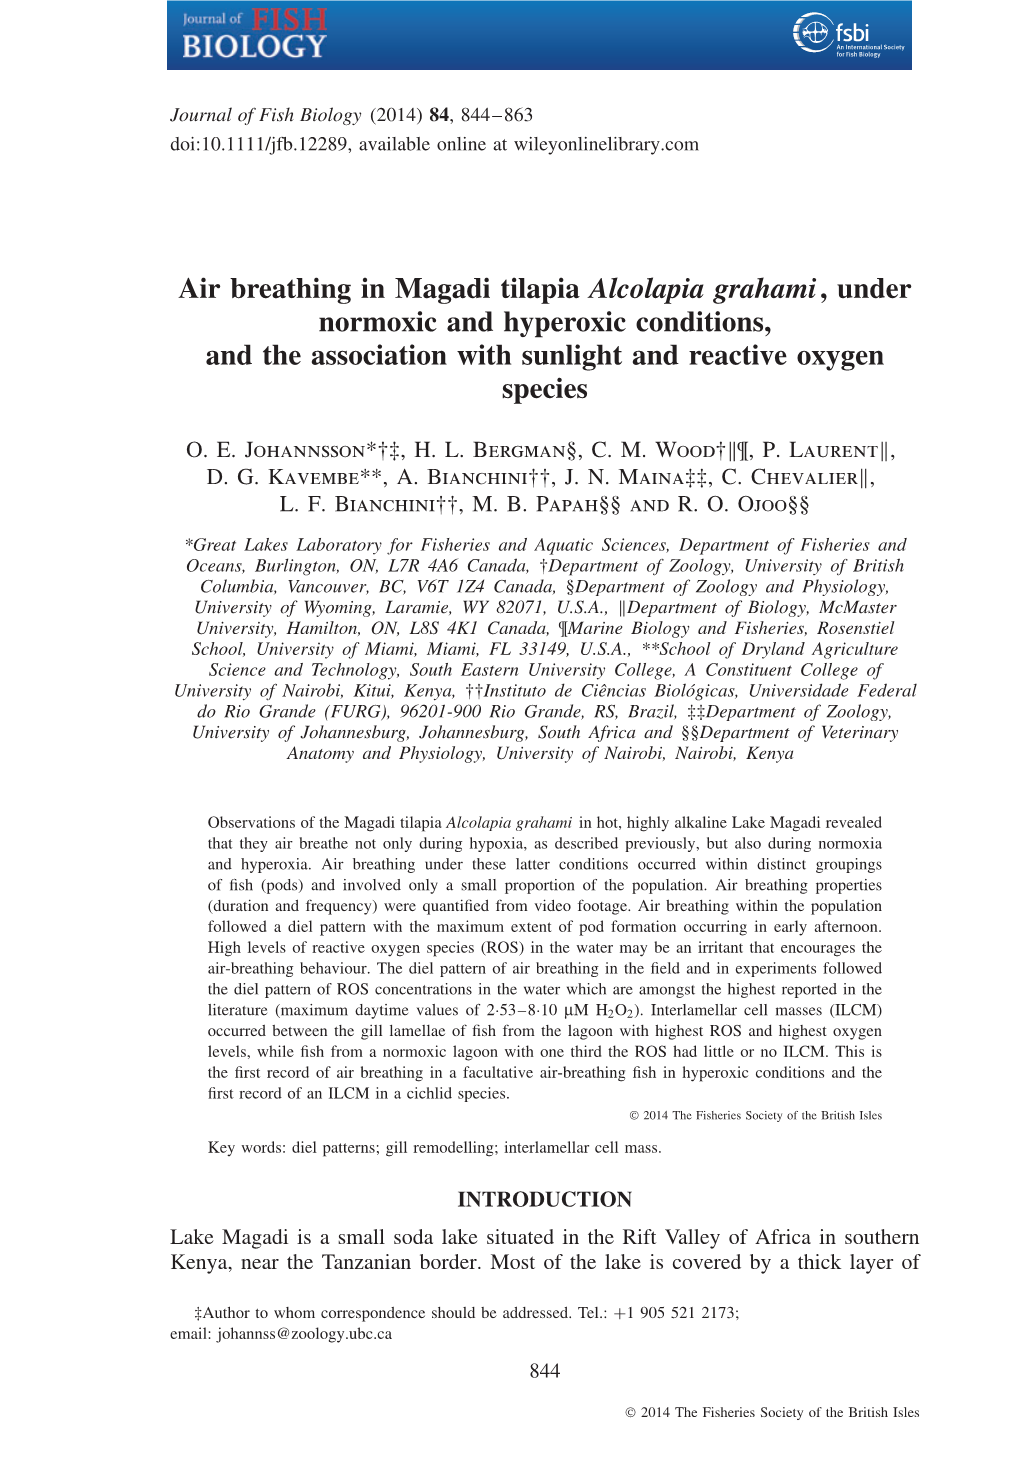 Air Breathing in Magadi Tilapia Alcolapia Grahami, Under Normoxic and Hyperoxic Conditions, and the Association with Sunlight and Reactive Oxygen Species